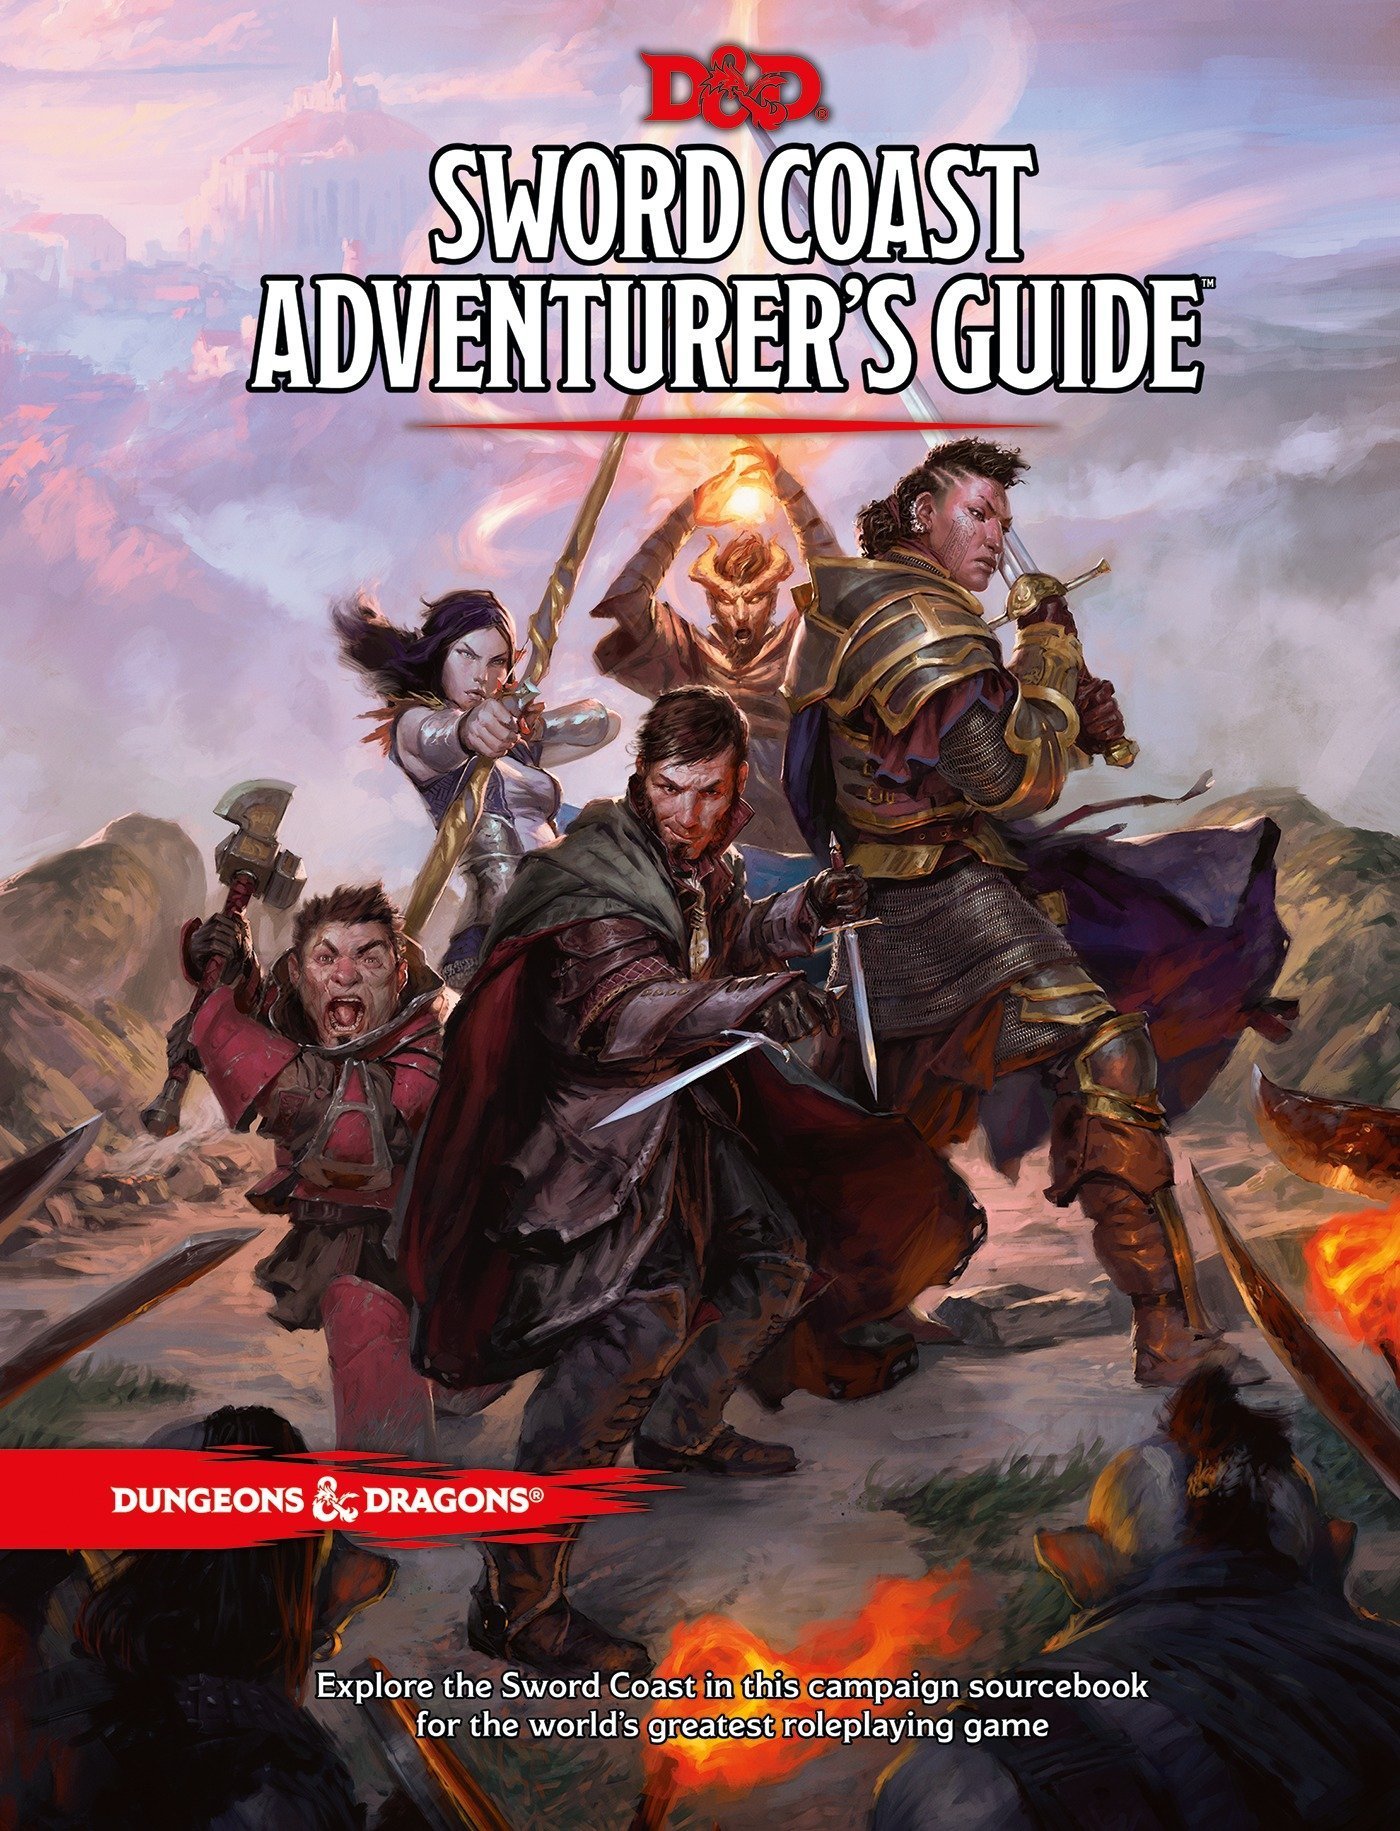 Dungeons&Dragons - Role Play - 5th Edition Sword Coast Adventurer's Guide (D&D) - Leker